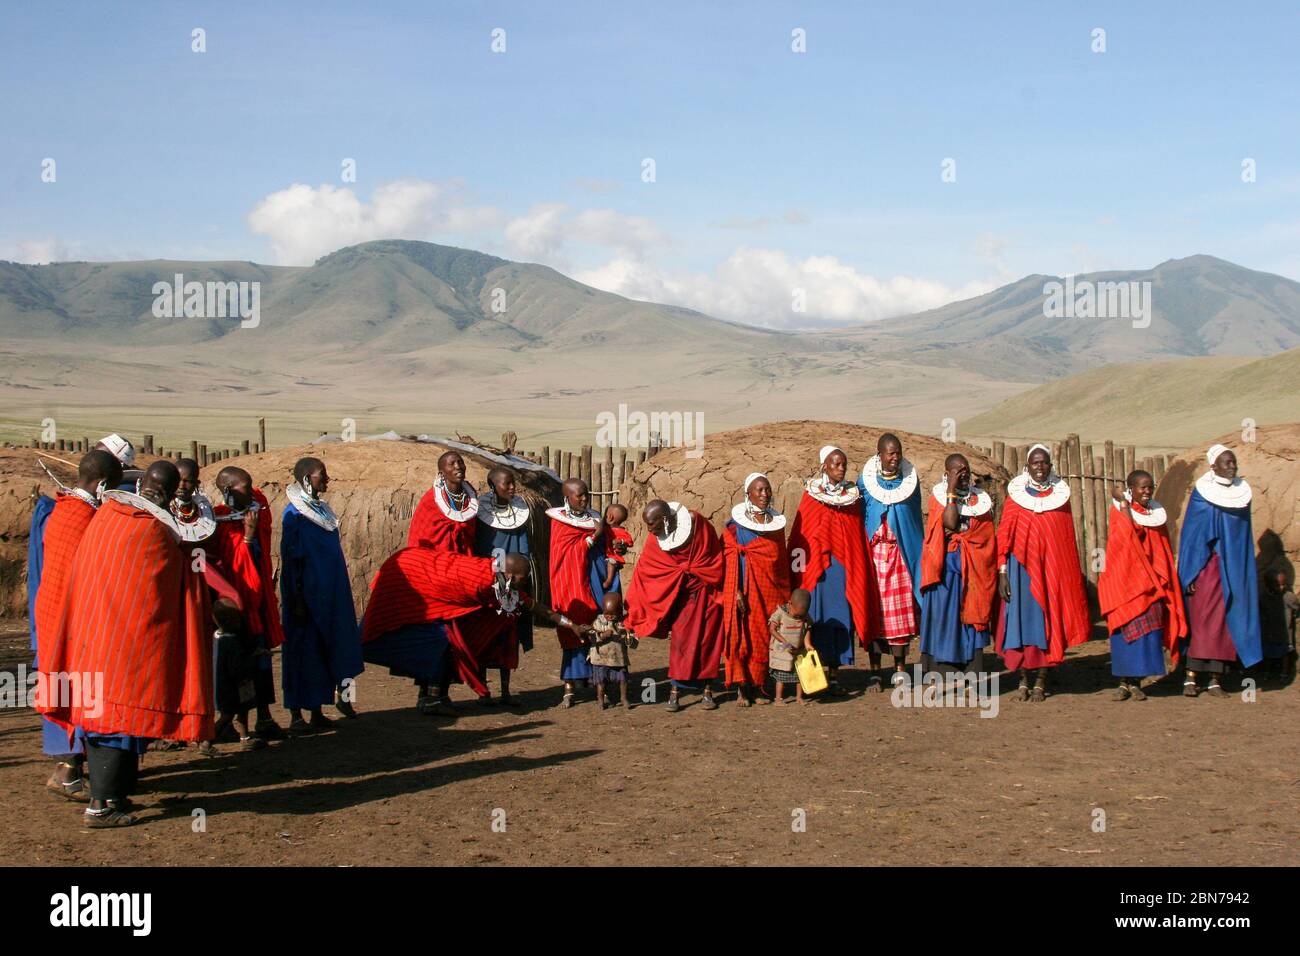 A Group of Maasai women in red robes. Maasai is an ethnic group of semi-nomadic people. Photographed in Tanzania Stock Photo